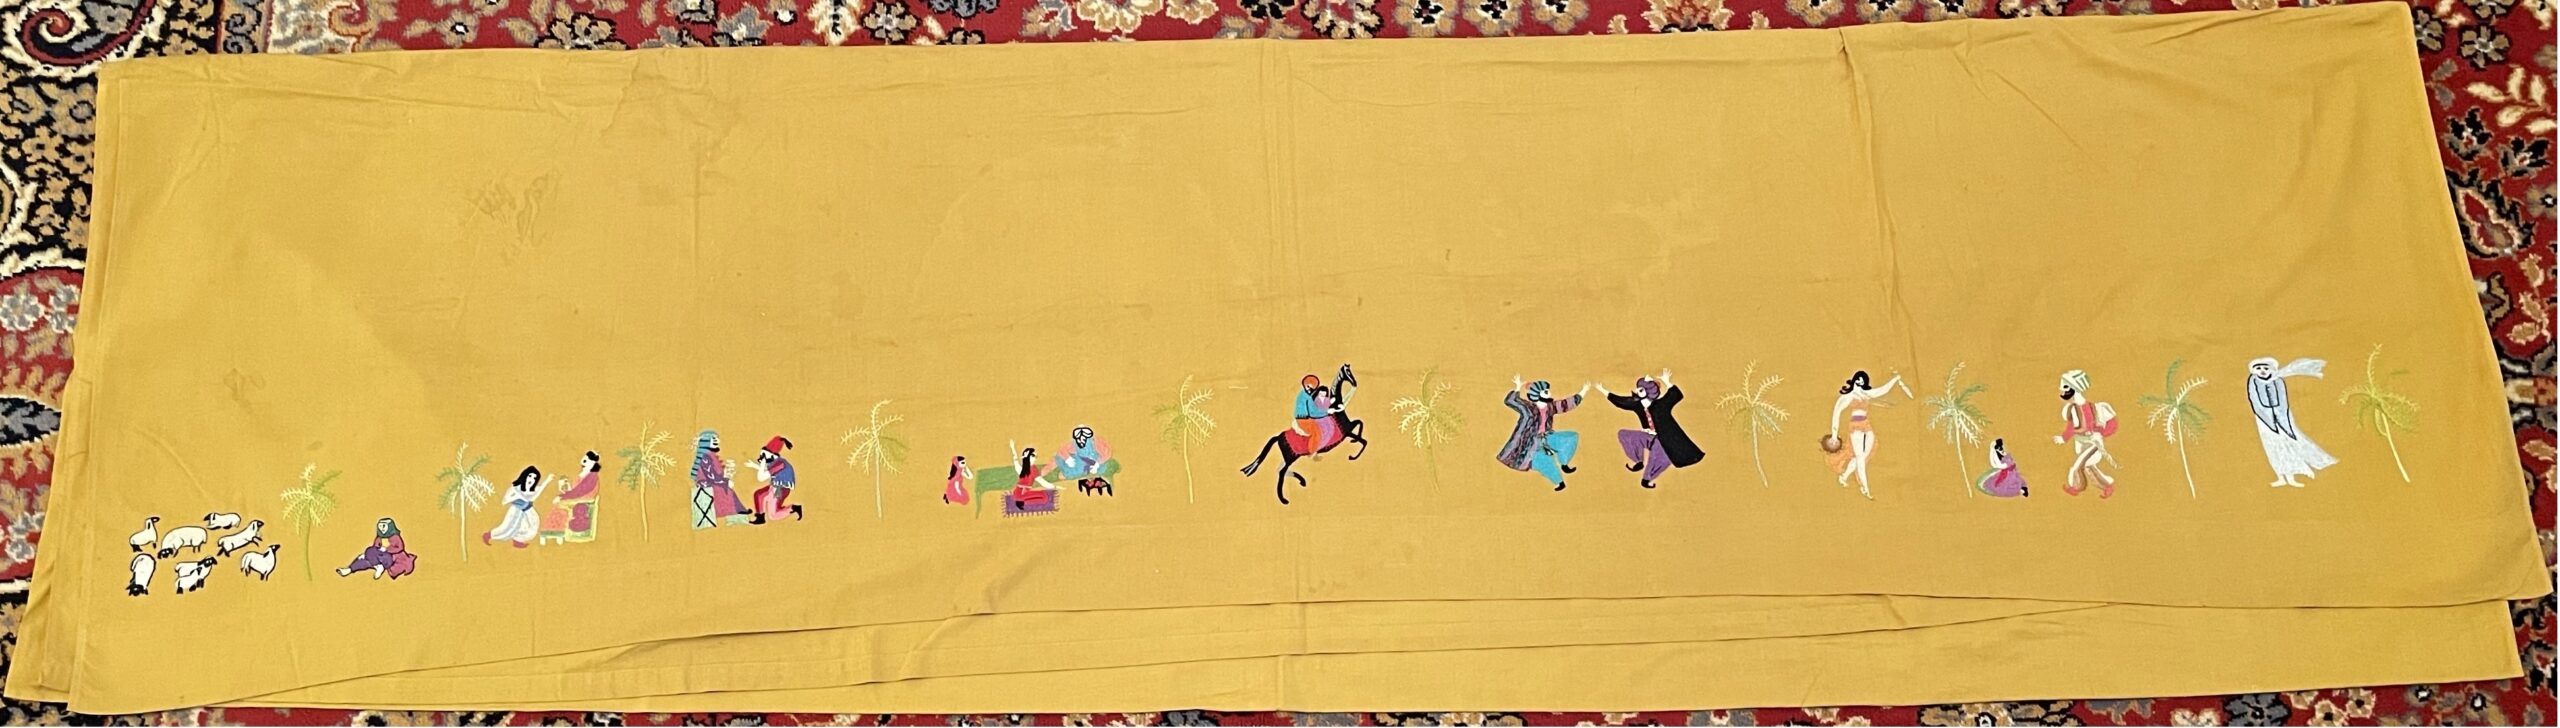 Color photograph of a horizontal piece of cloth, yellow-orange in color, embroidered with a line of tiny people, animals, and trees along the bottom edge